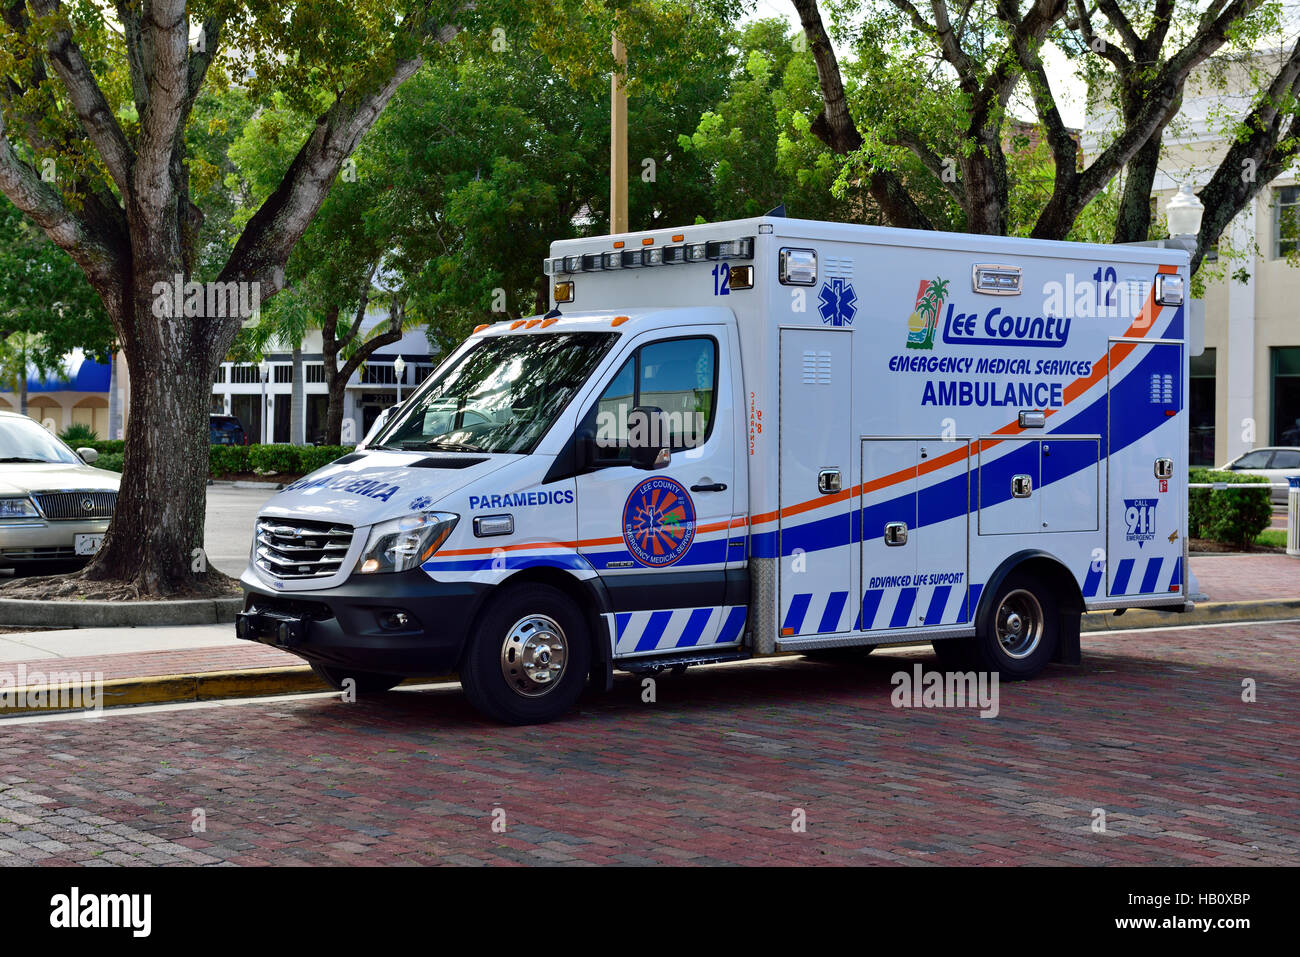 Ambulance of Lee County seen in Fort Myers, Florida, USA Stock Photo - Alamy